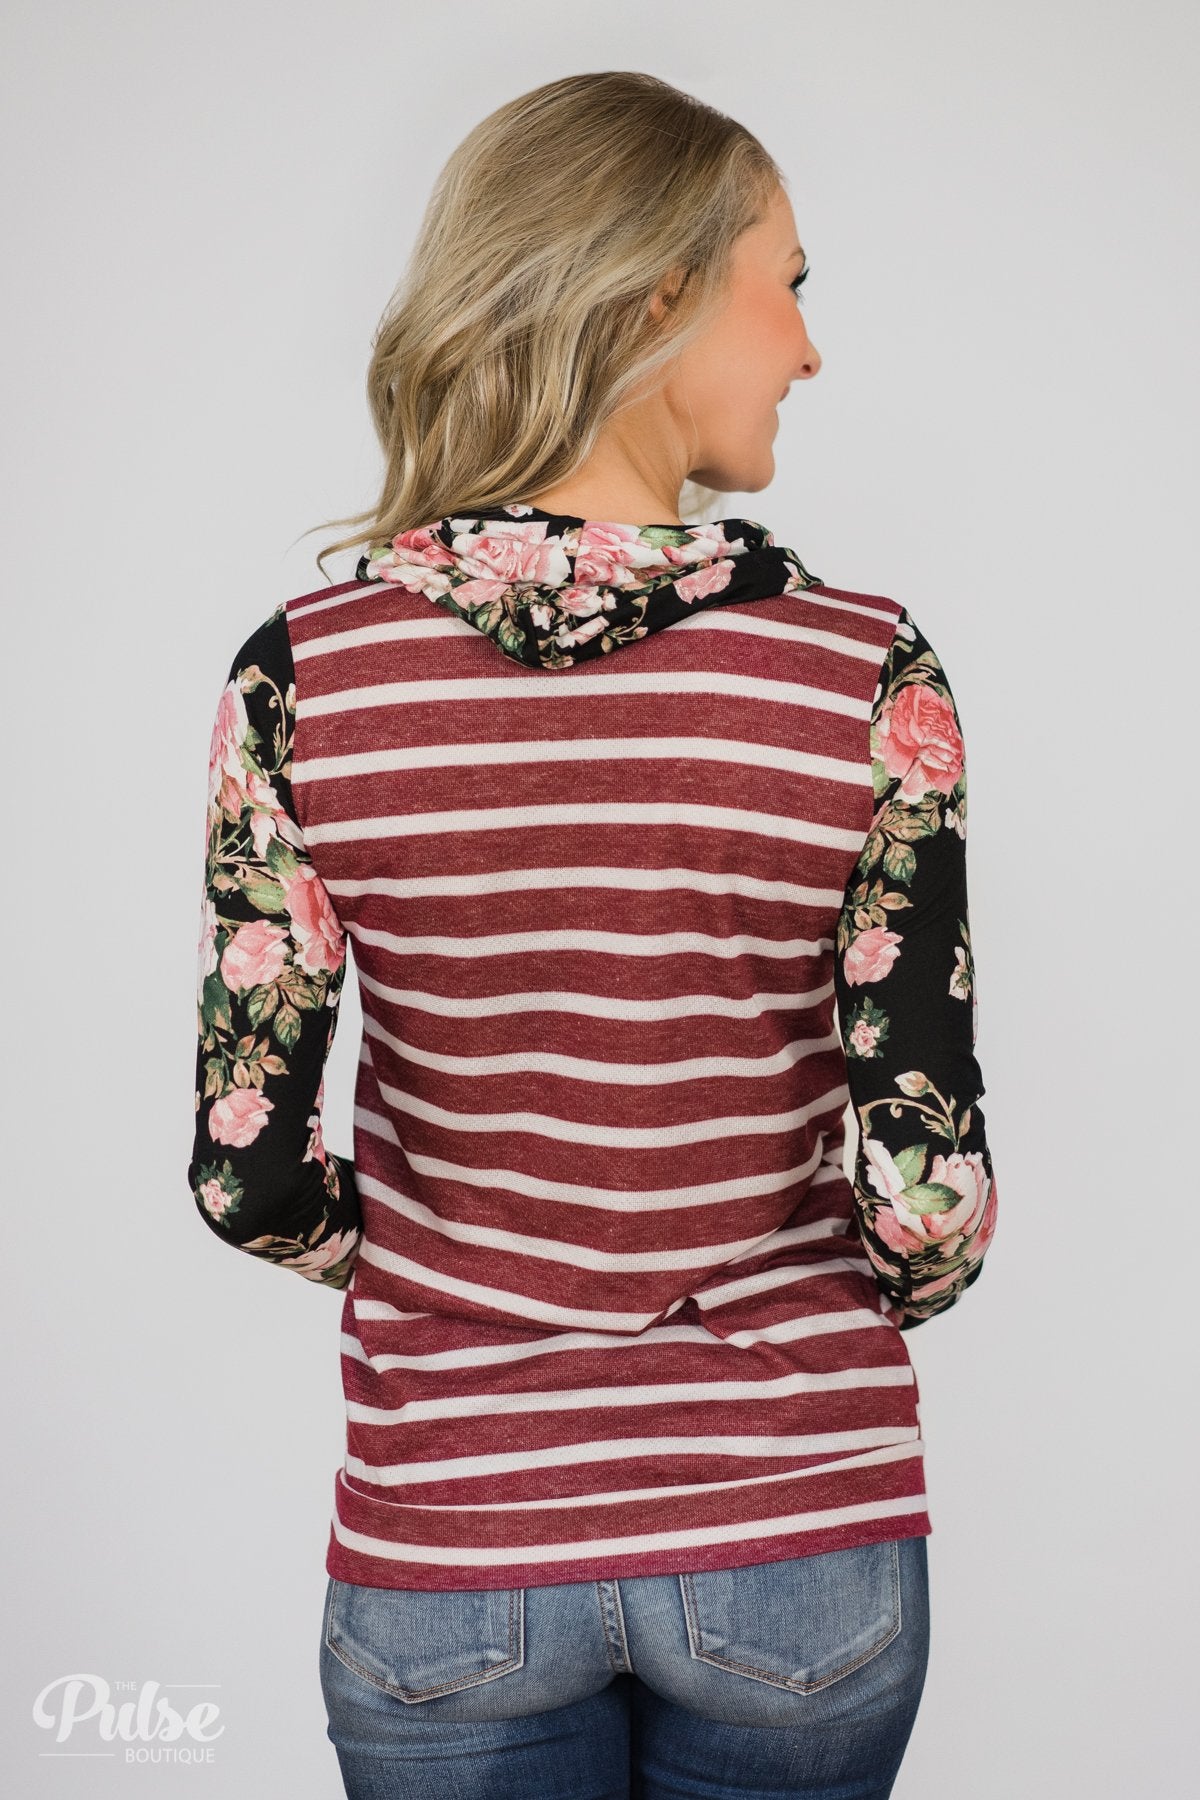 Pure Beauty Floral & Striped Cowl Neck Top- Black & Burgundy